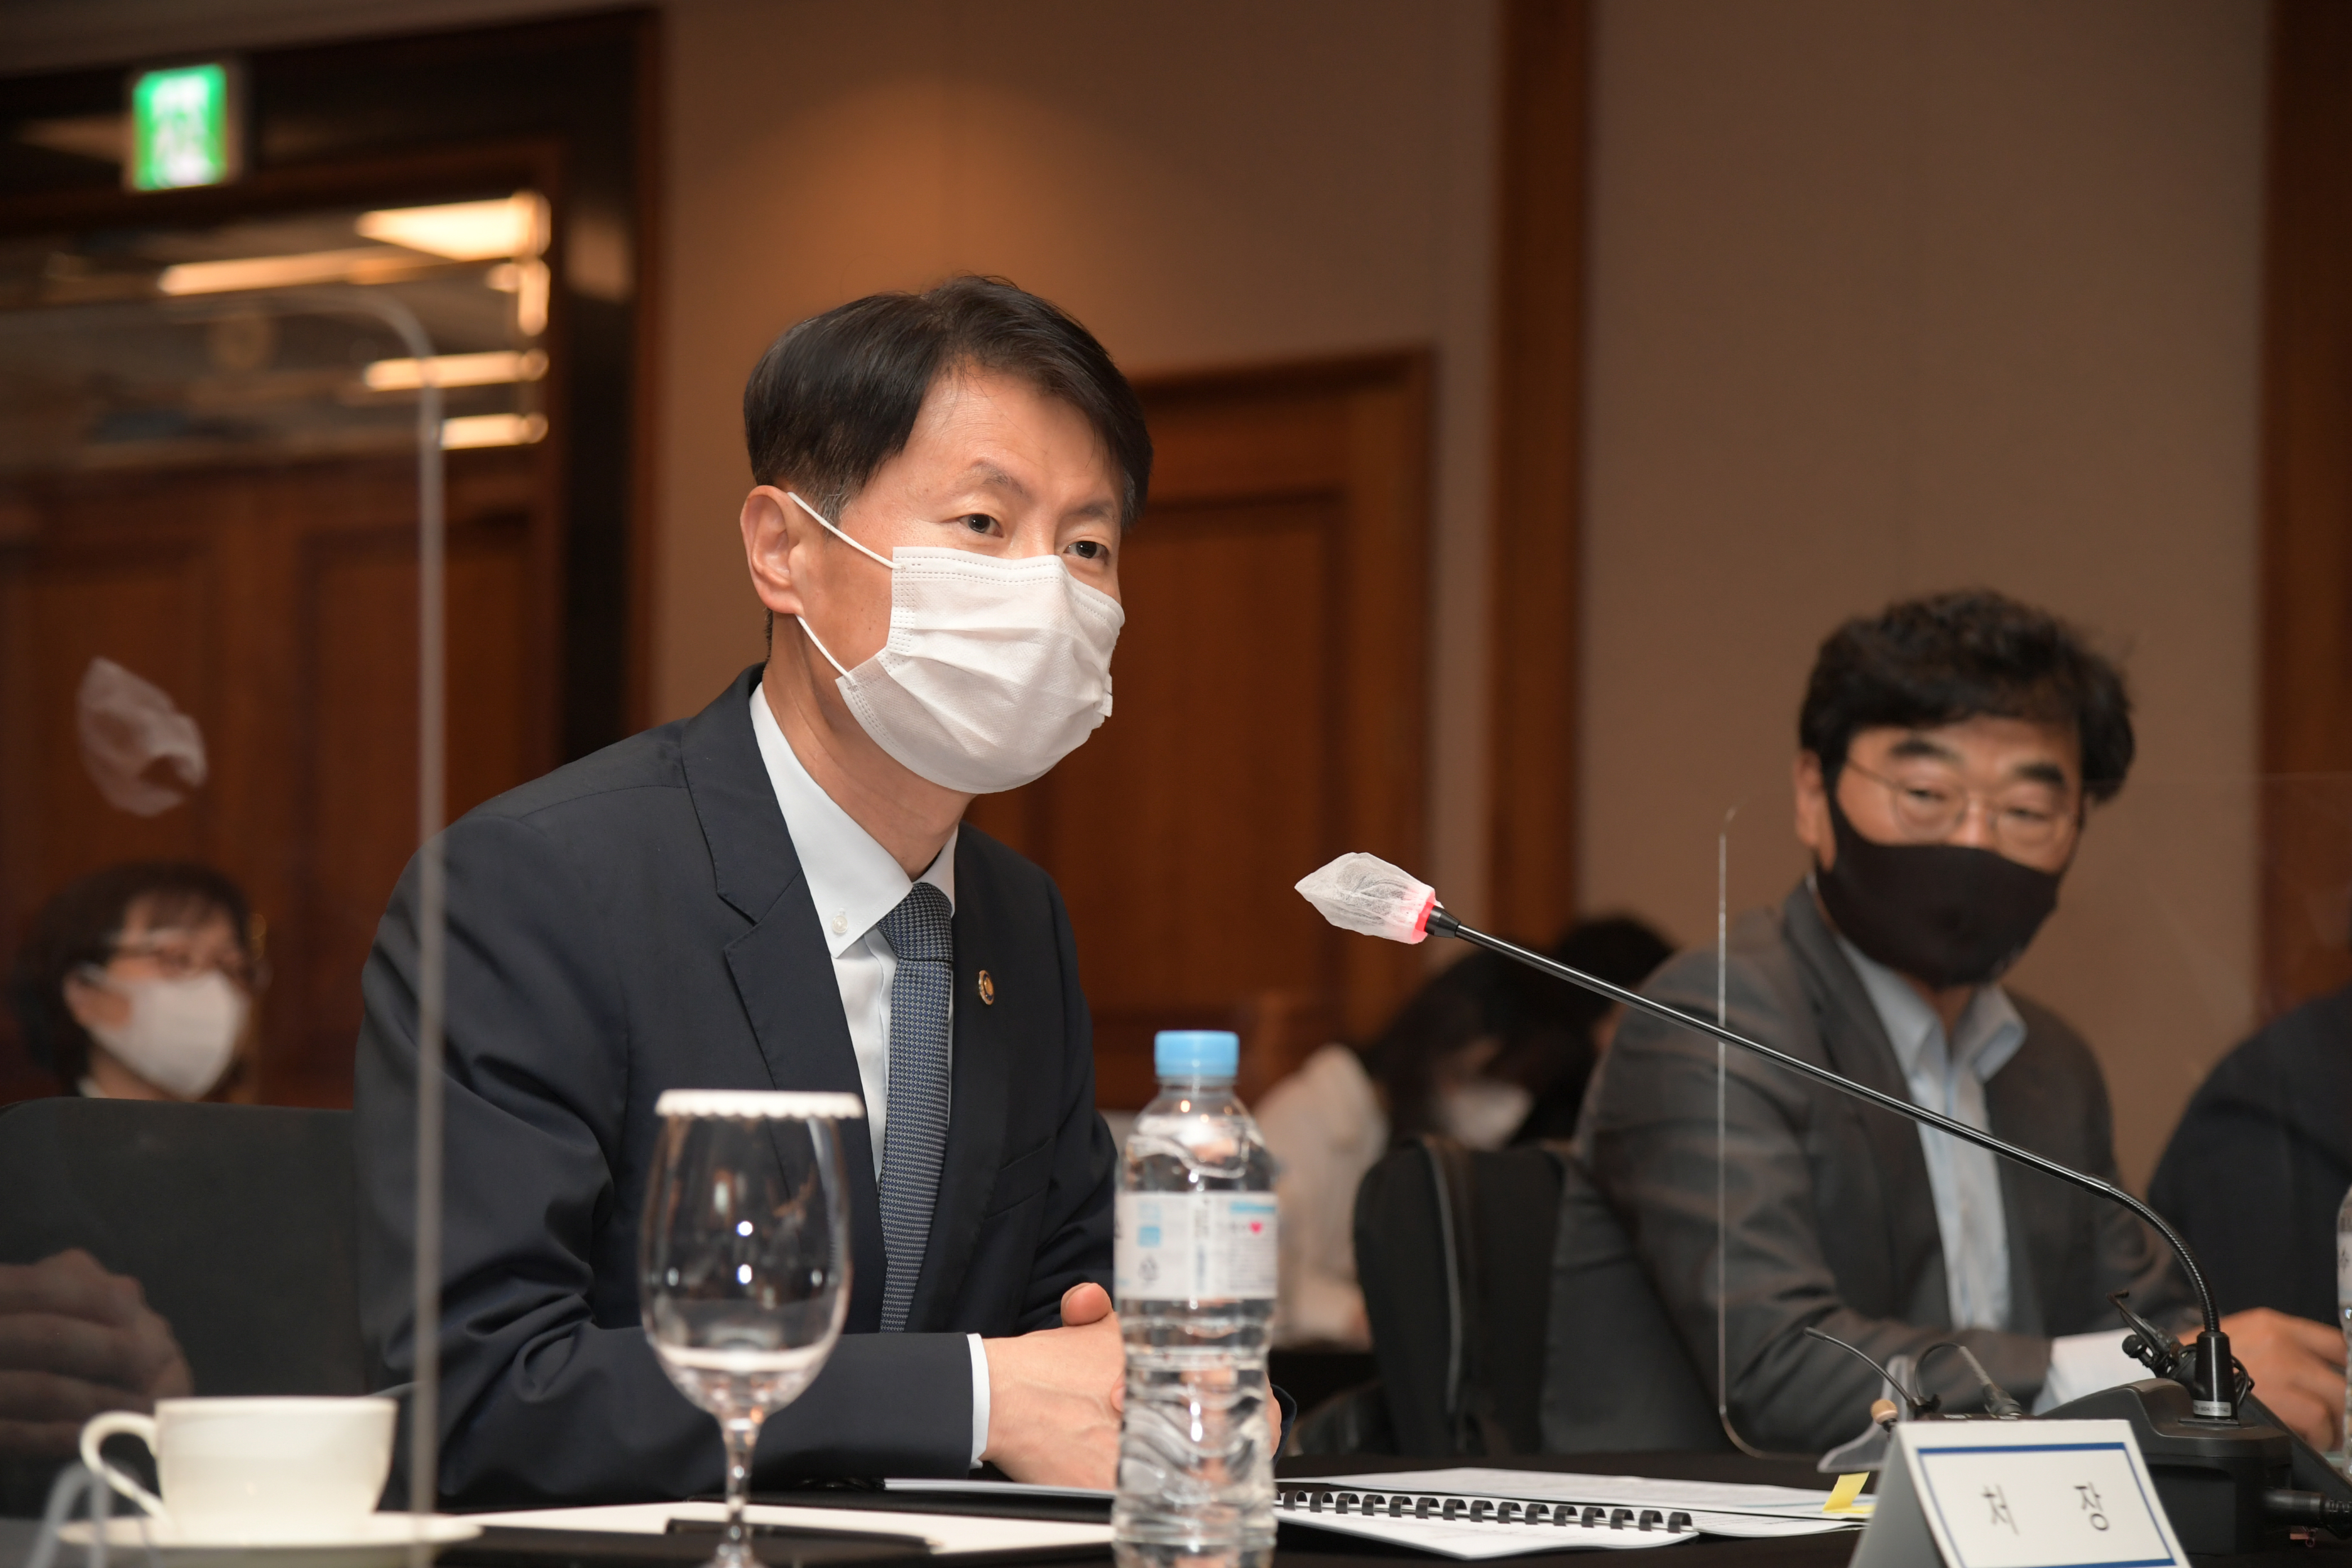 Photo News3 - [May 13, 2021] Minister attends the Meeting to Support the Development of Homegrown Vaccines